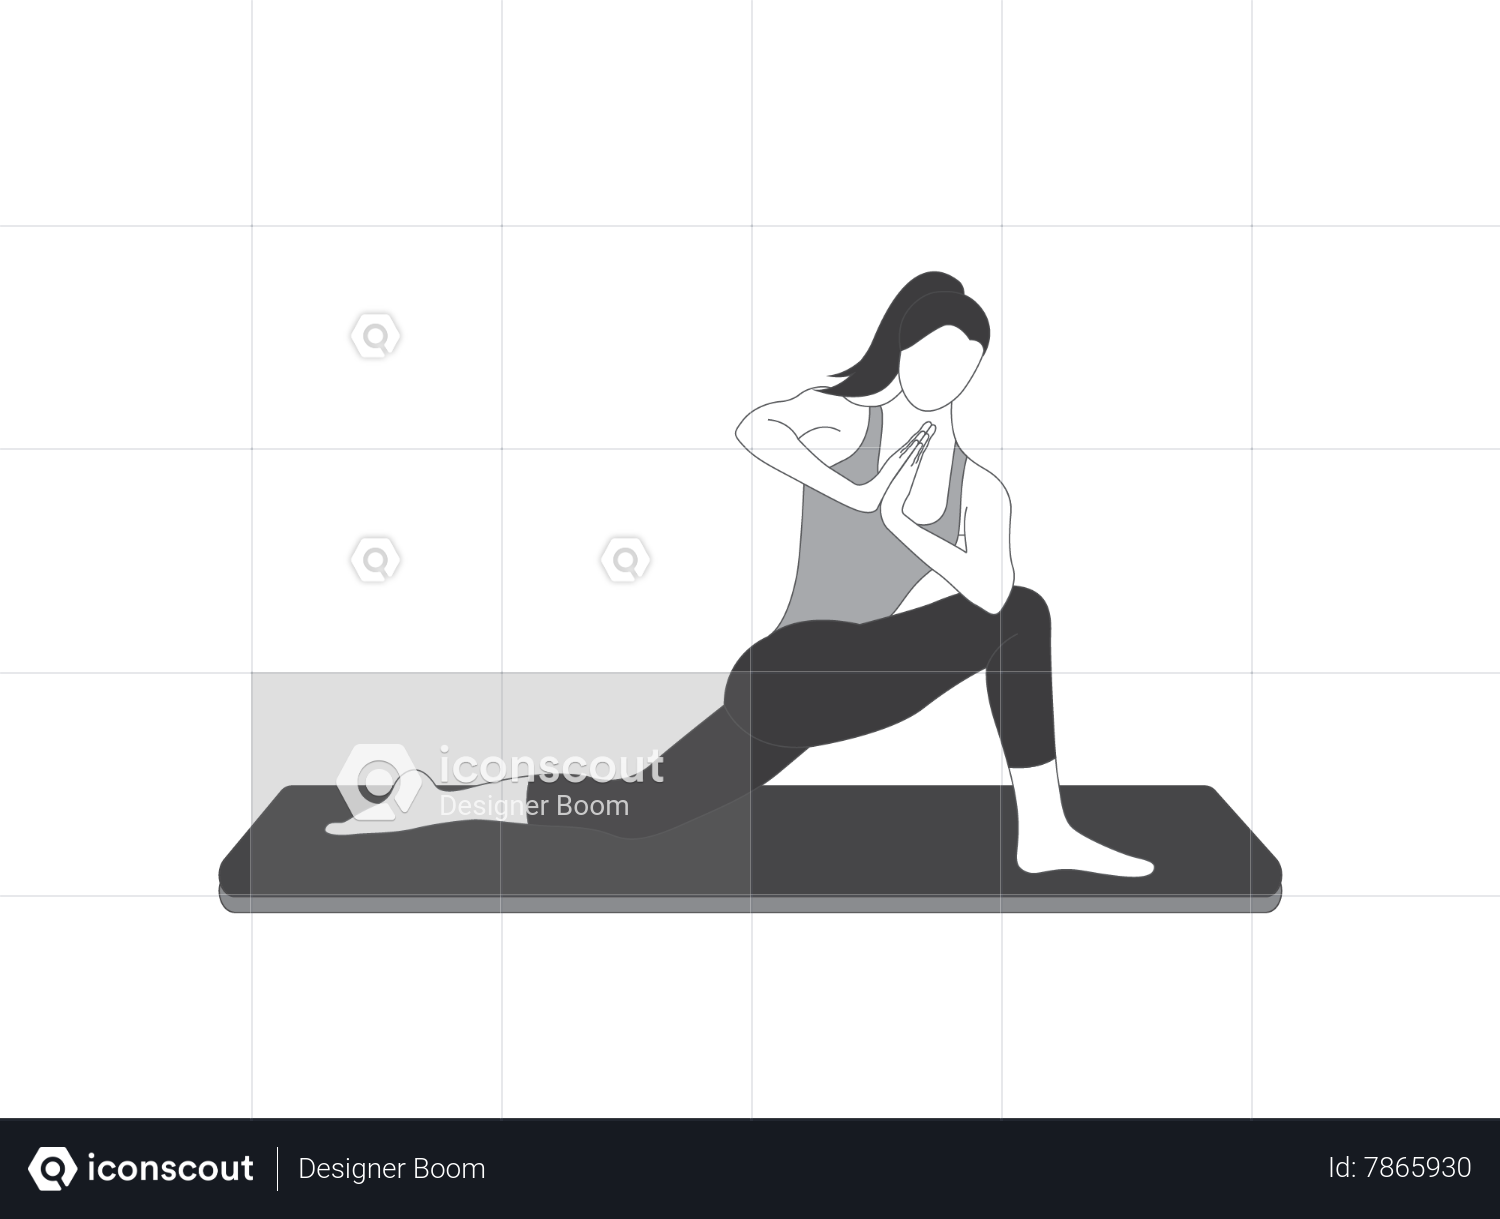 Workout Chair Pose To Twisted Eagle Pose Exercise Stock Illustration -  Download Image Now - iStock